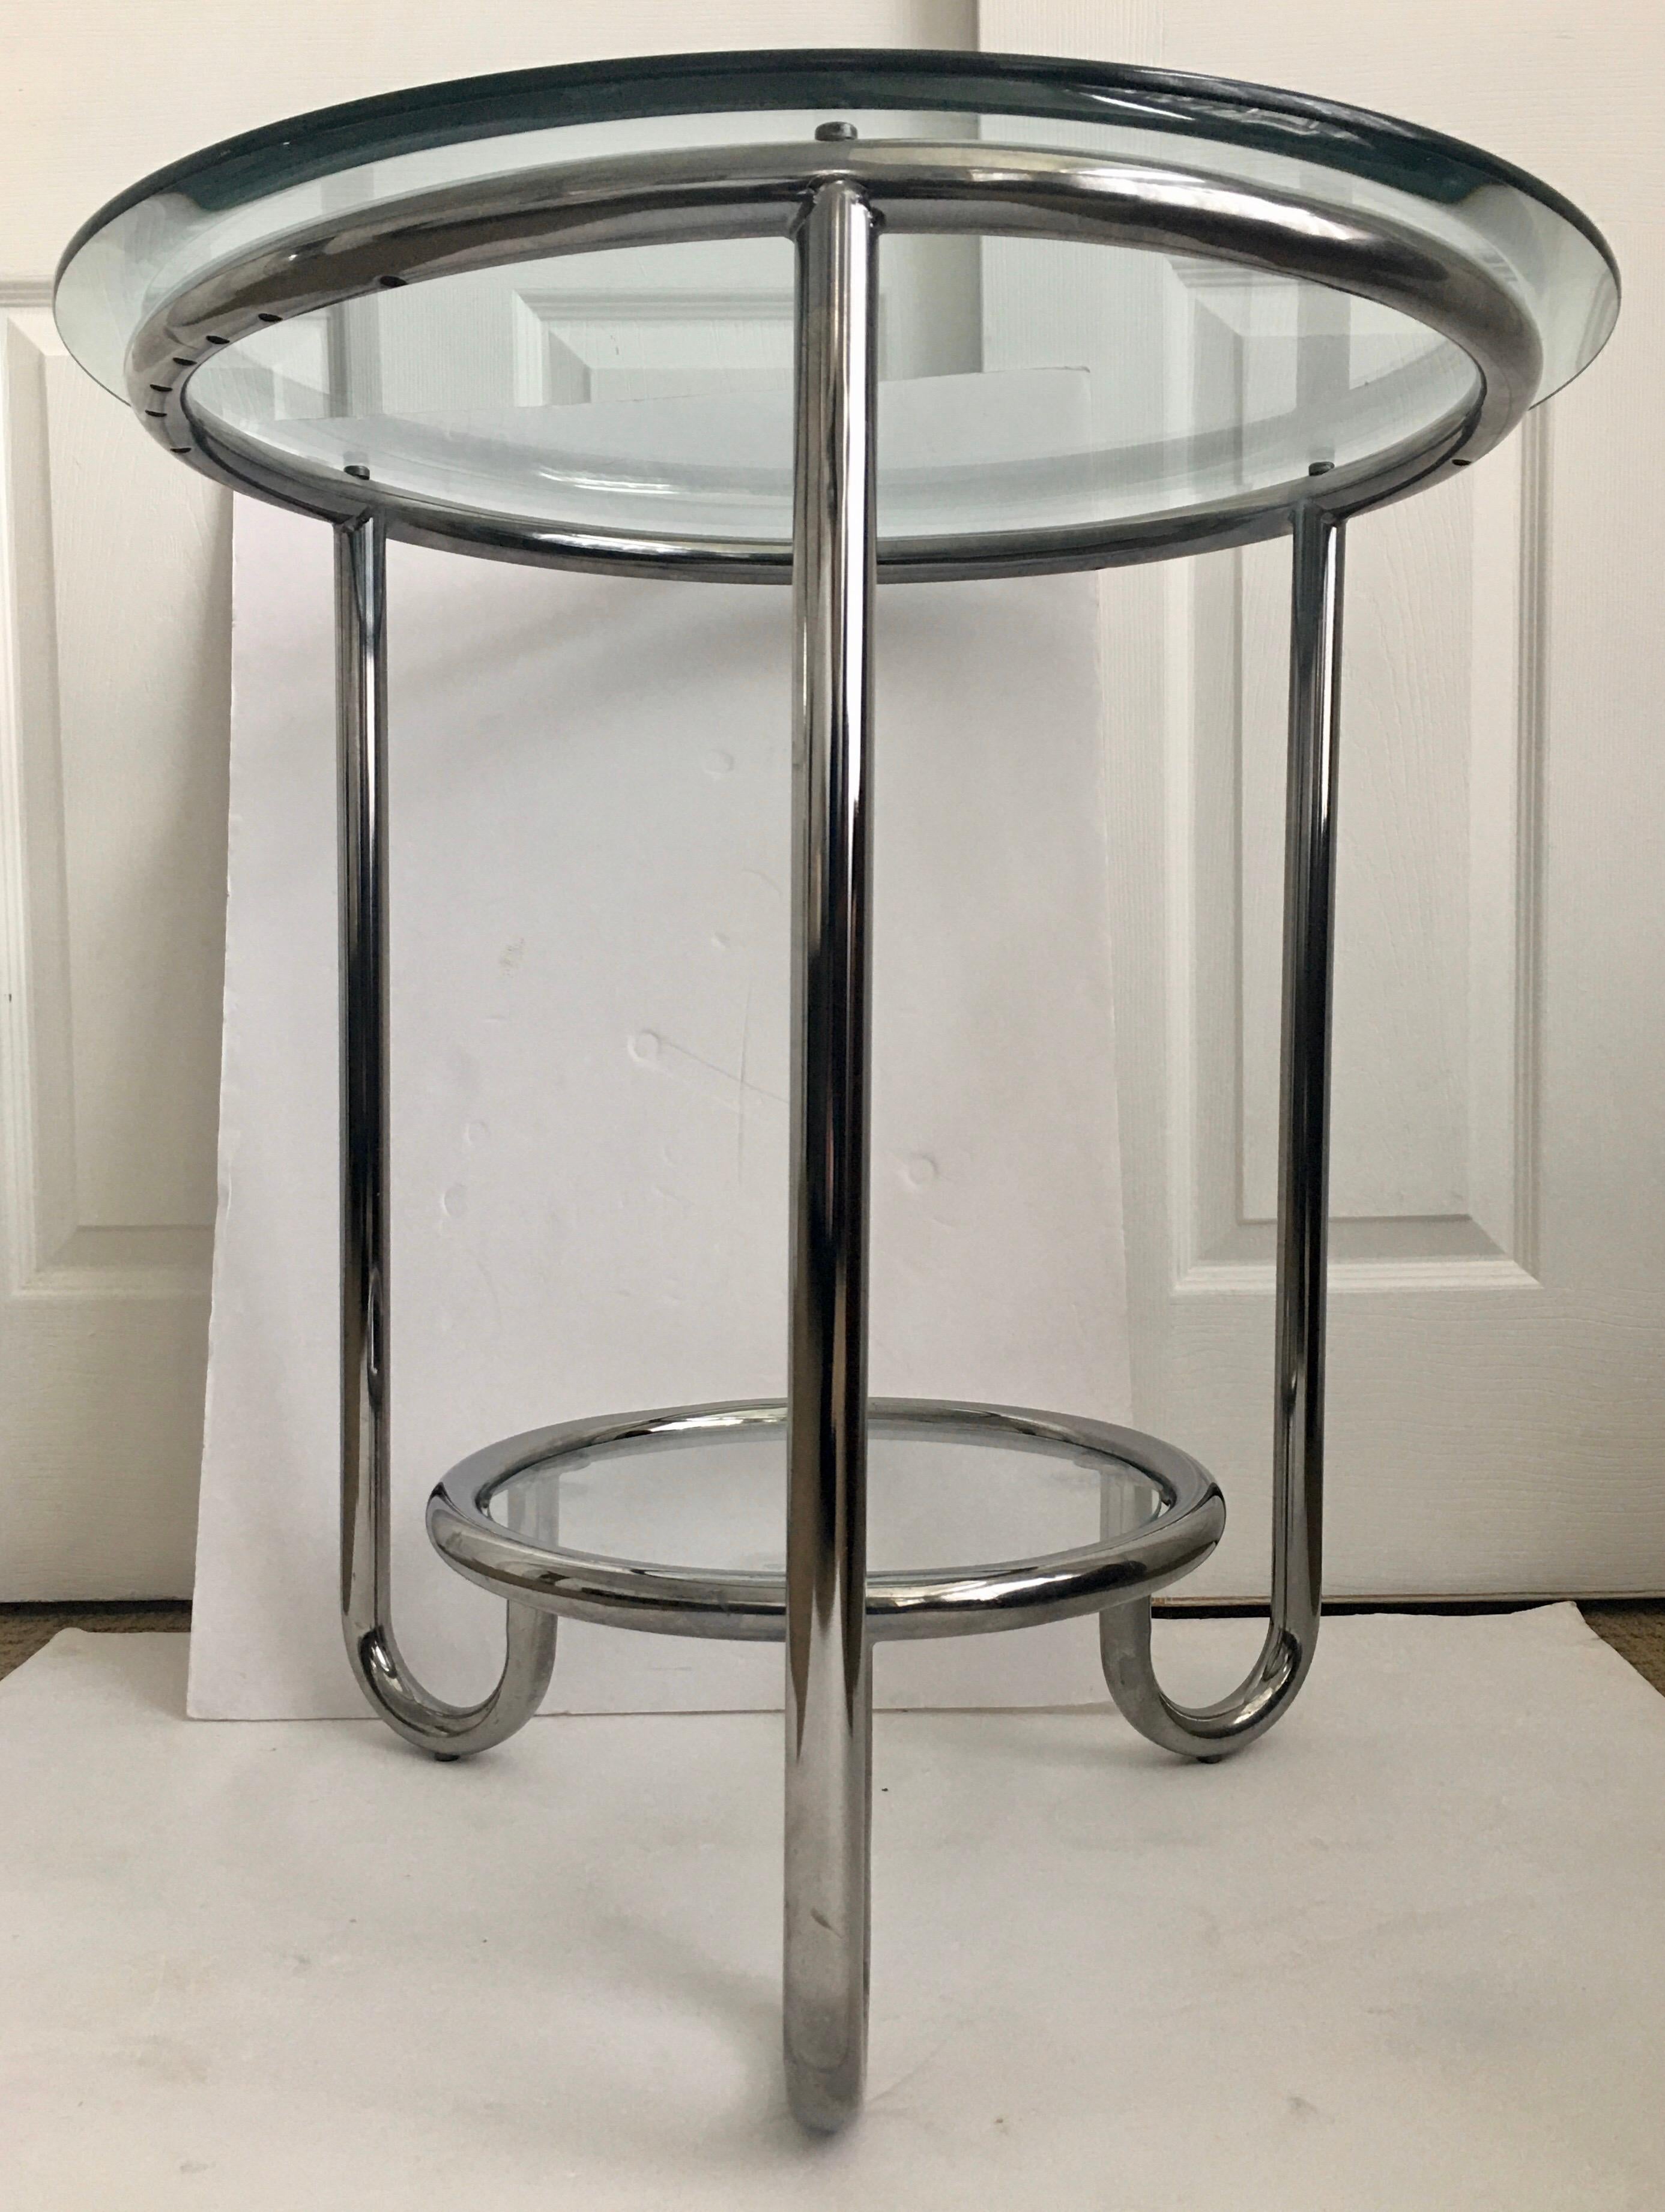 Art Deco style J-Leg tubular chrome and glass occasional end or side table in the style of Warren Mcarthur.  The modern sculptural two tier frame features curved U-shaped hair pin legs and holds two removable clear glass tops. Large round glass top